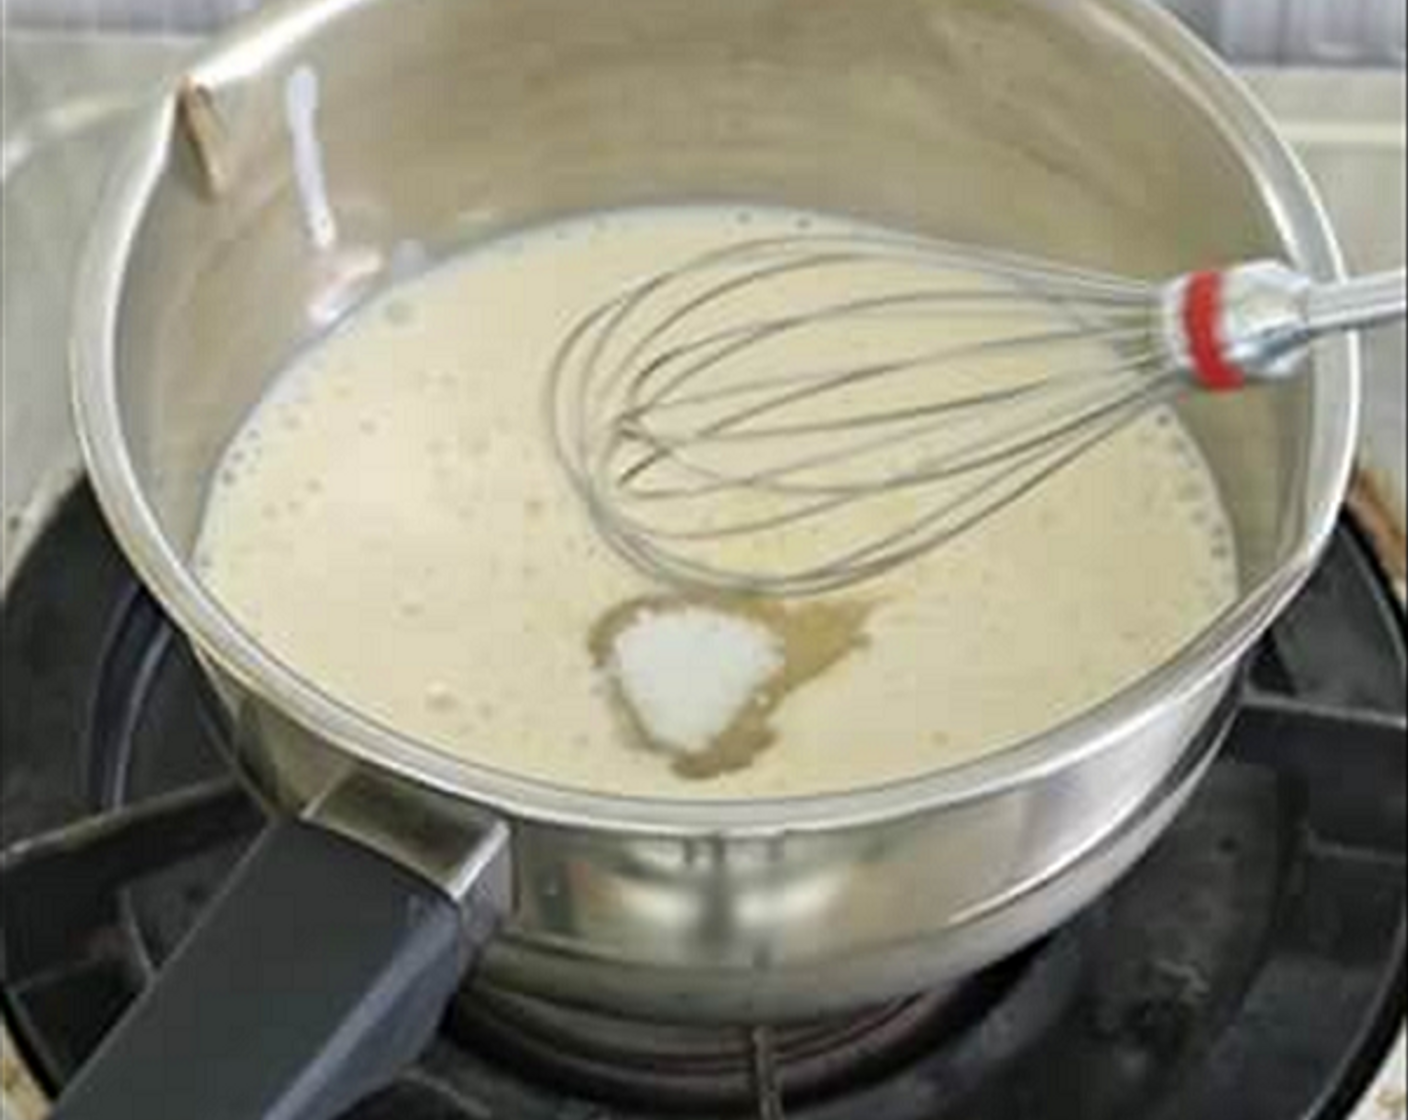 step 5 For the soya Milk Pudding - Combine the Unsweetened Soy Milk (1 1/3 cups) and Caster Sugar (3 1/2 Tbsp) in a pot. Lightly boil the soya milk and stir the sugar till dissolved at low heat.